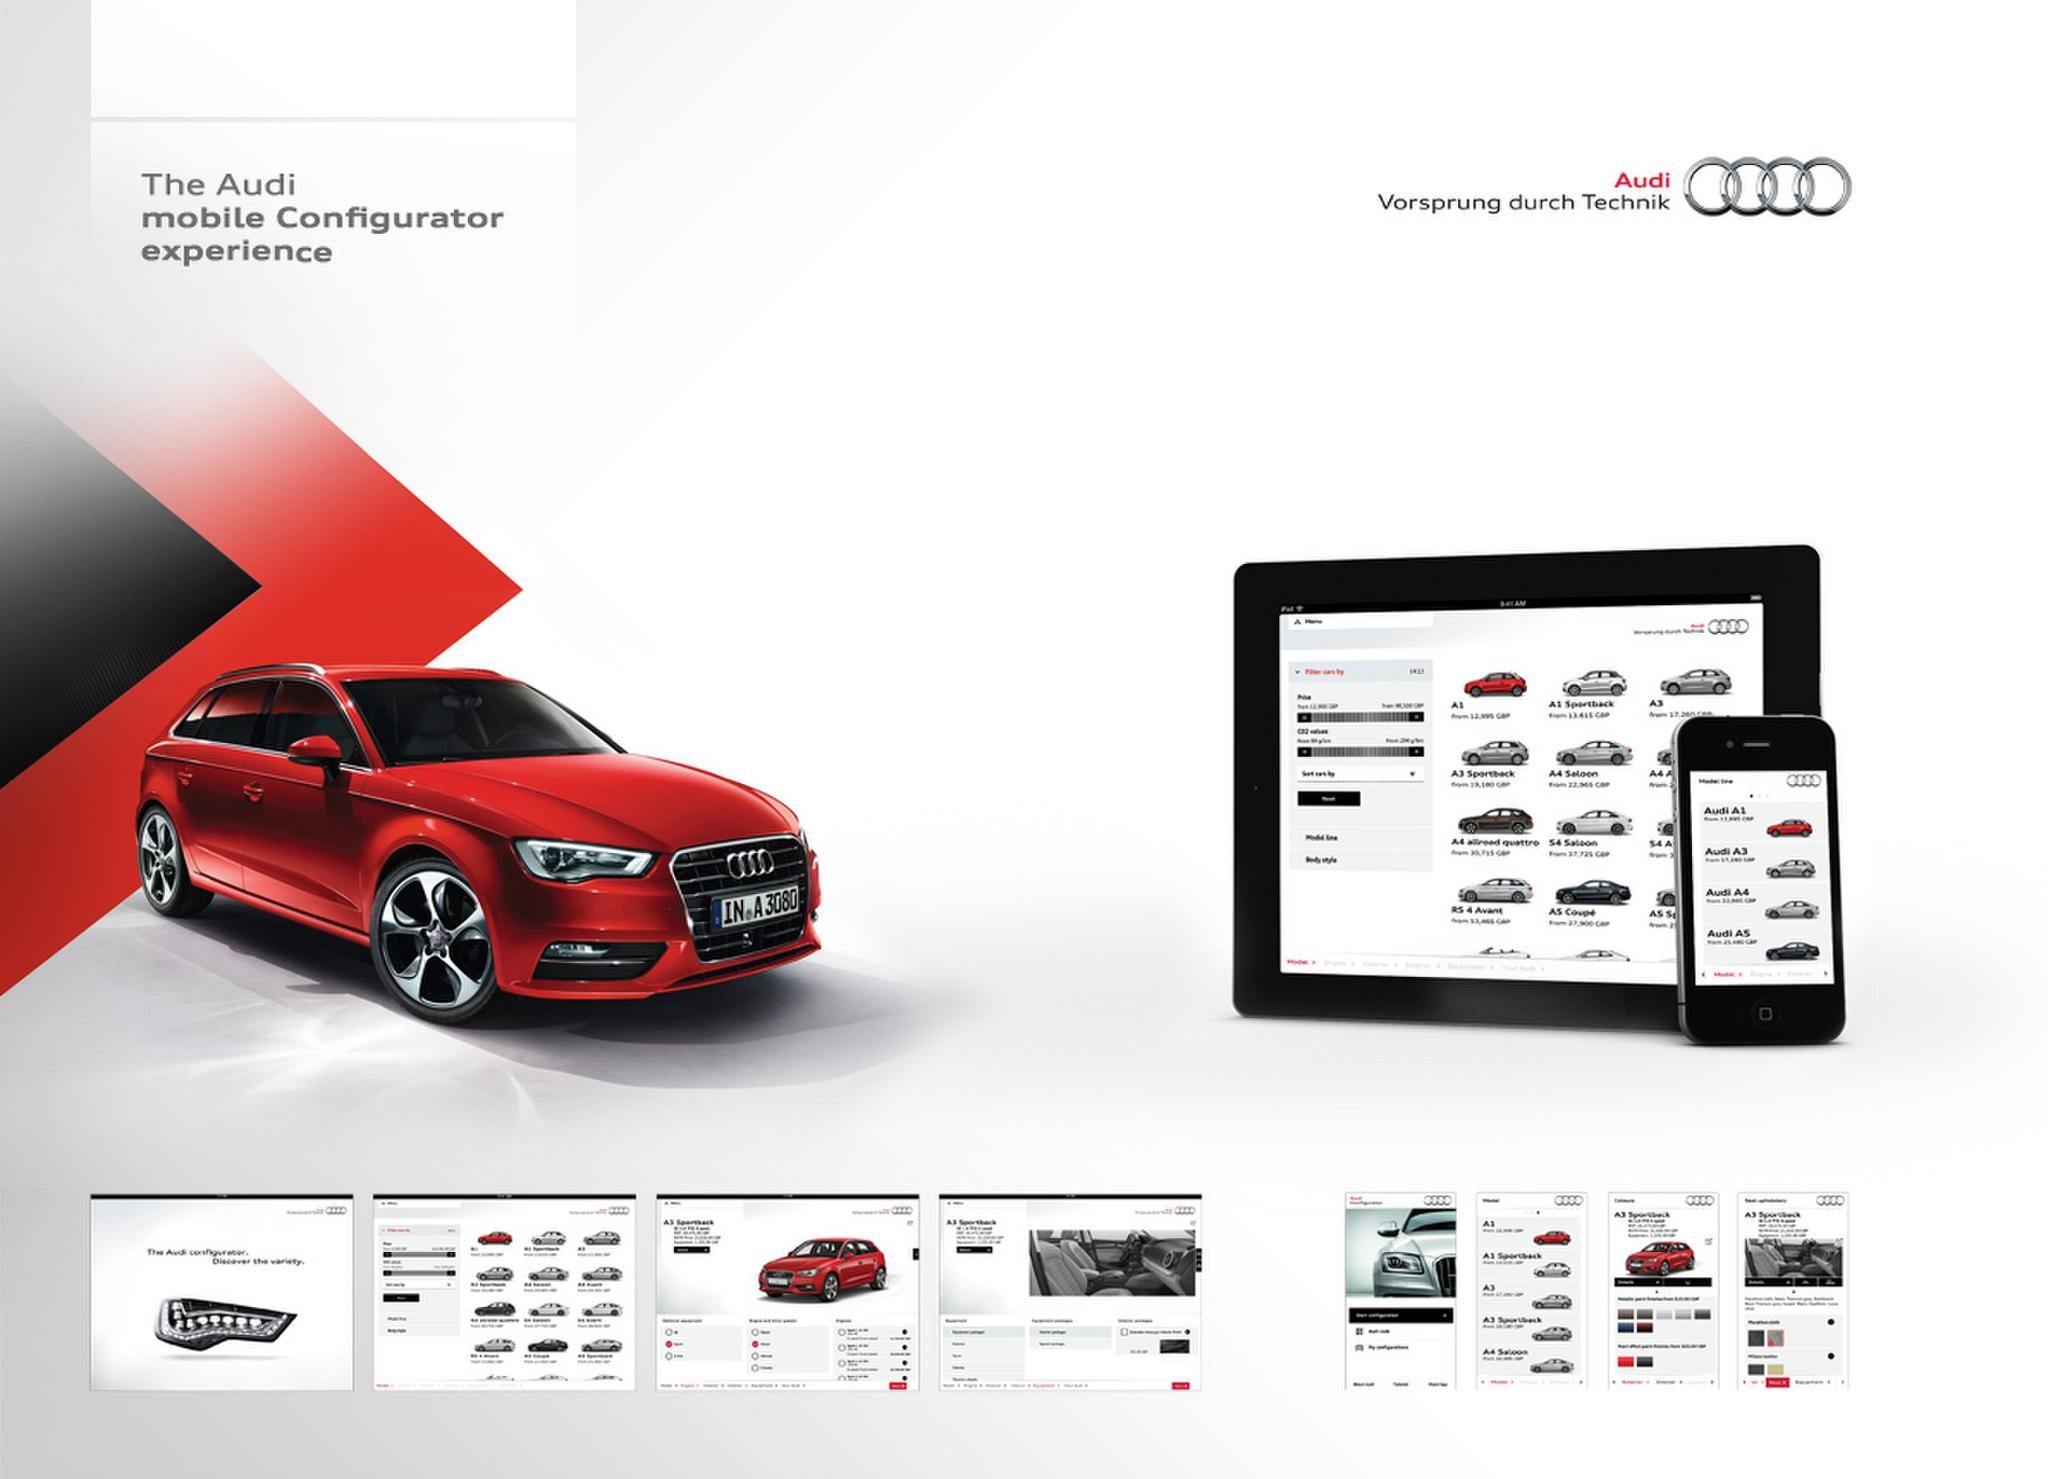 THE AUDI TOUCH CONFIGURATION EXPERIENCE